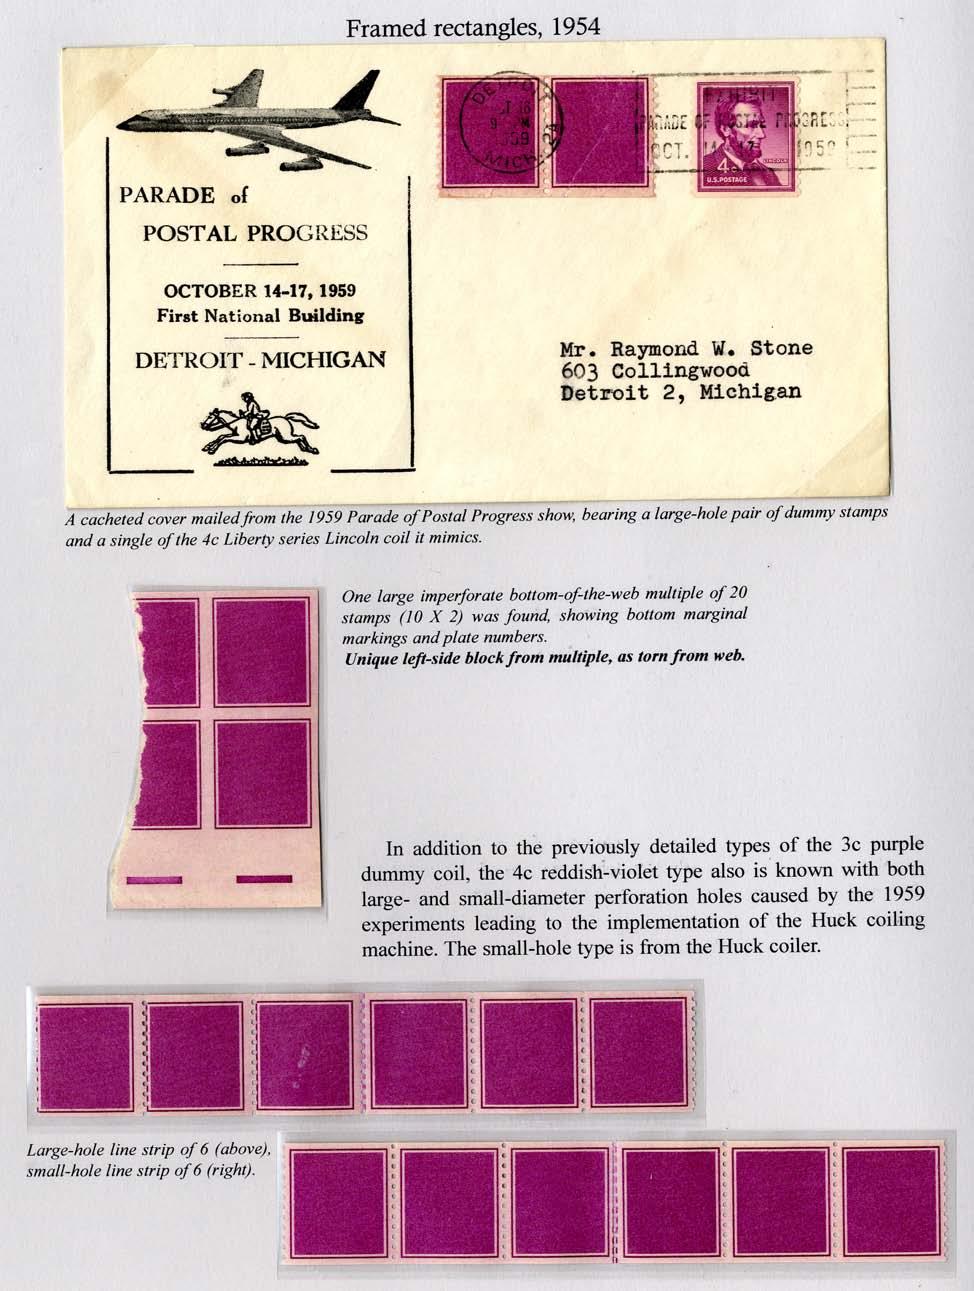 The last page to be illustrated in this newsletter from Joann Lenz s exhibit shows a Unique left-side block cut from only-known bottom-margin multiple of